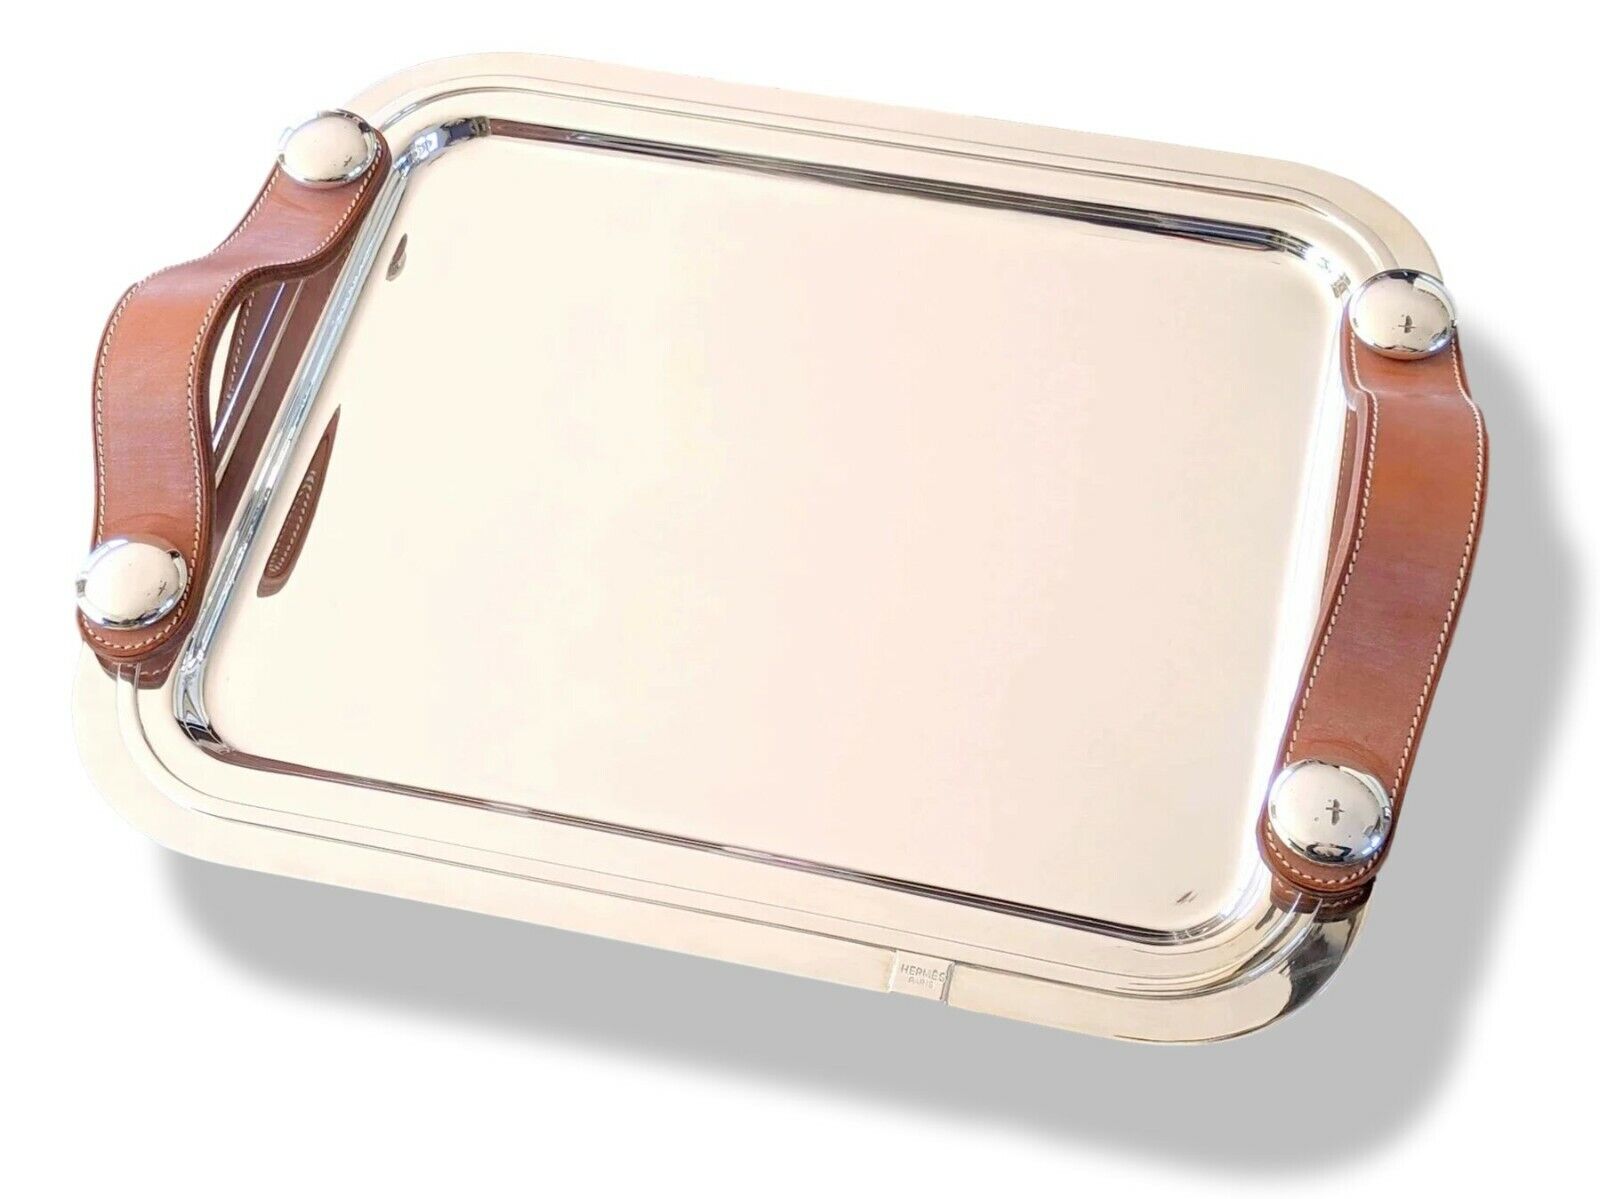 Hermes [M3] Home Art Deco Plated Silver Tray SPARTE PM with Leather Handles NEW